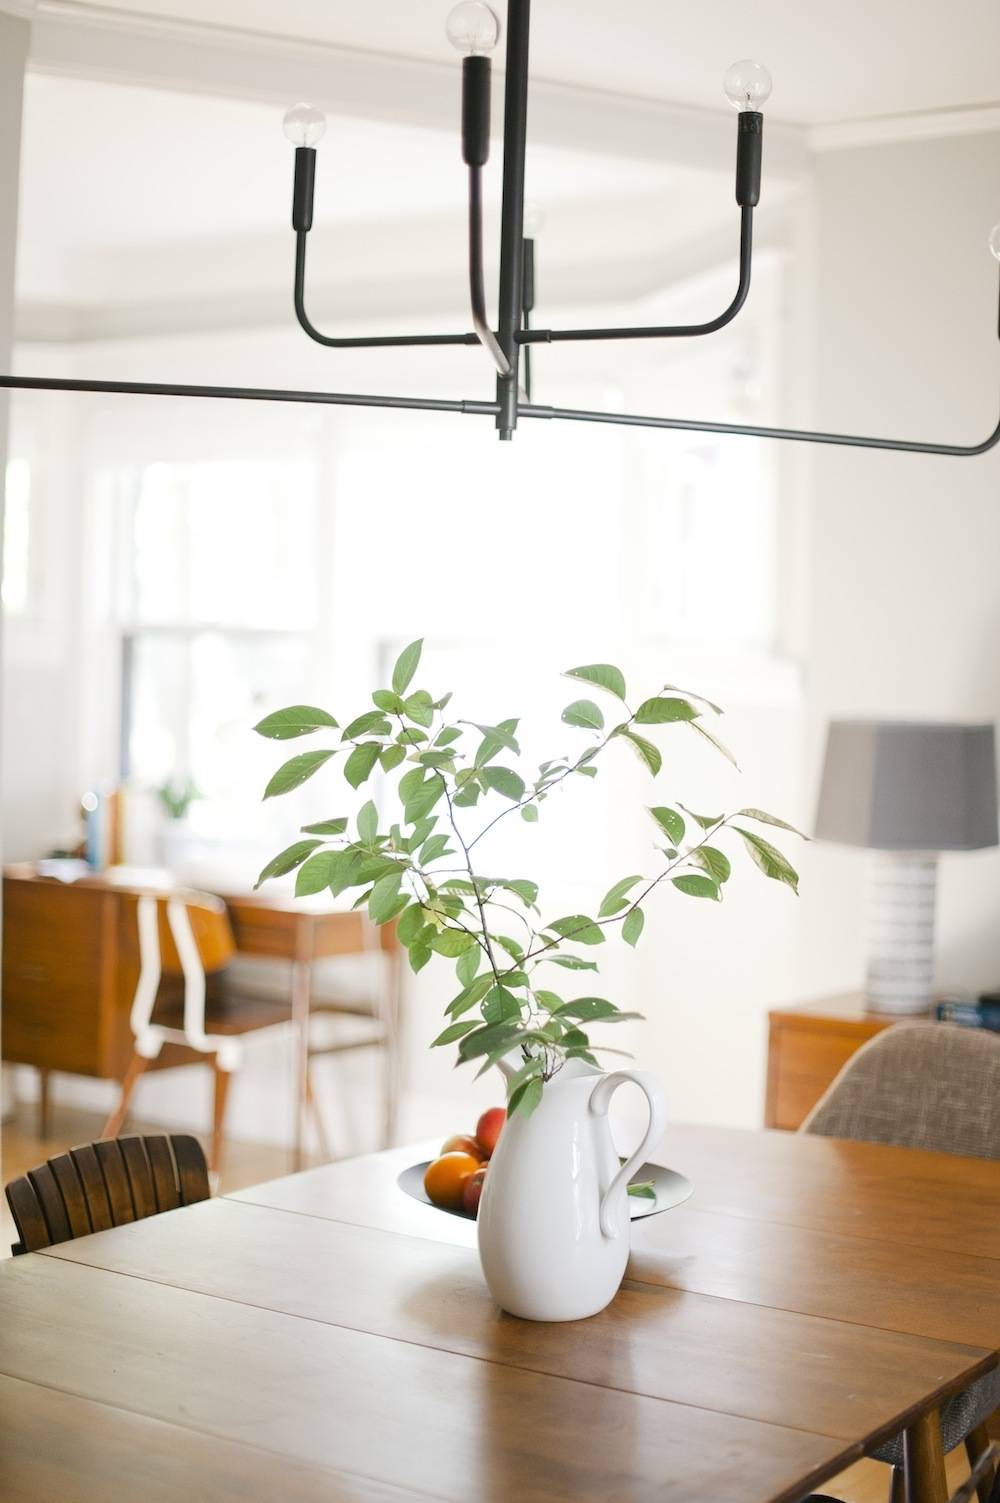 Room featuring dining table with foliage in a pitcher, under a modern four-pronged light fixture.